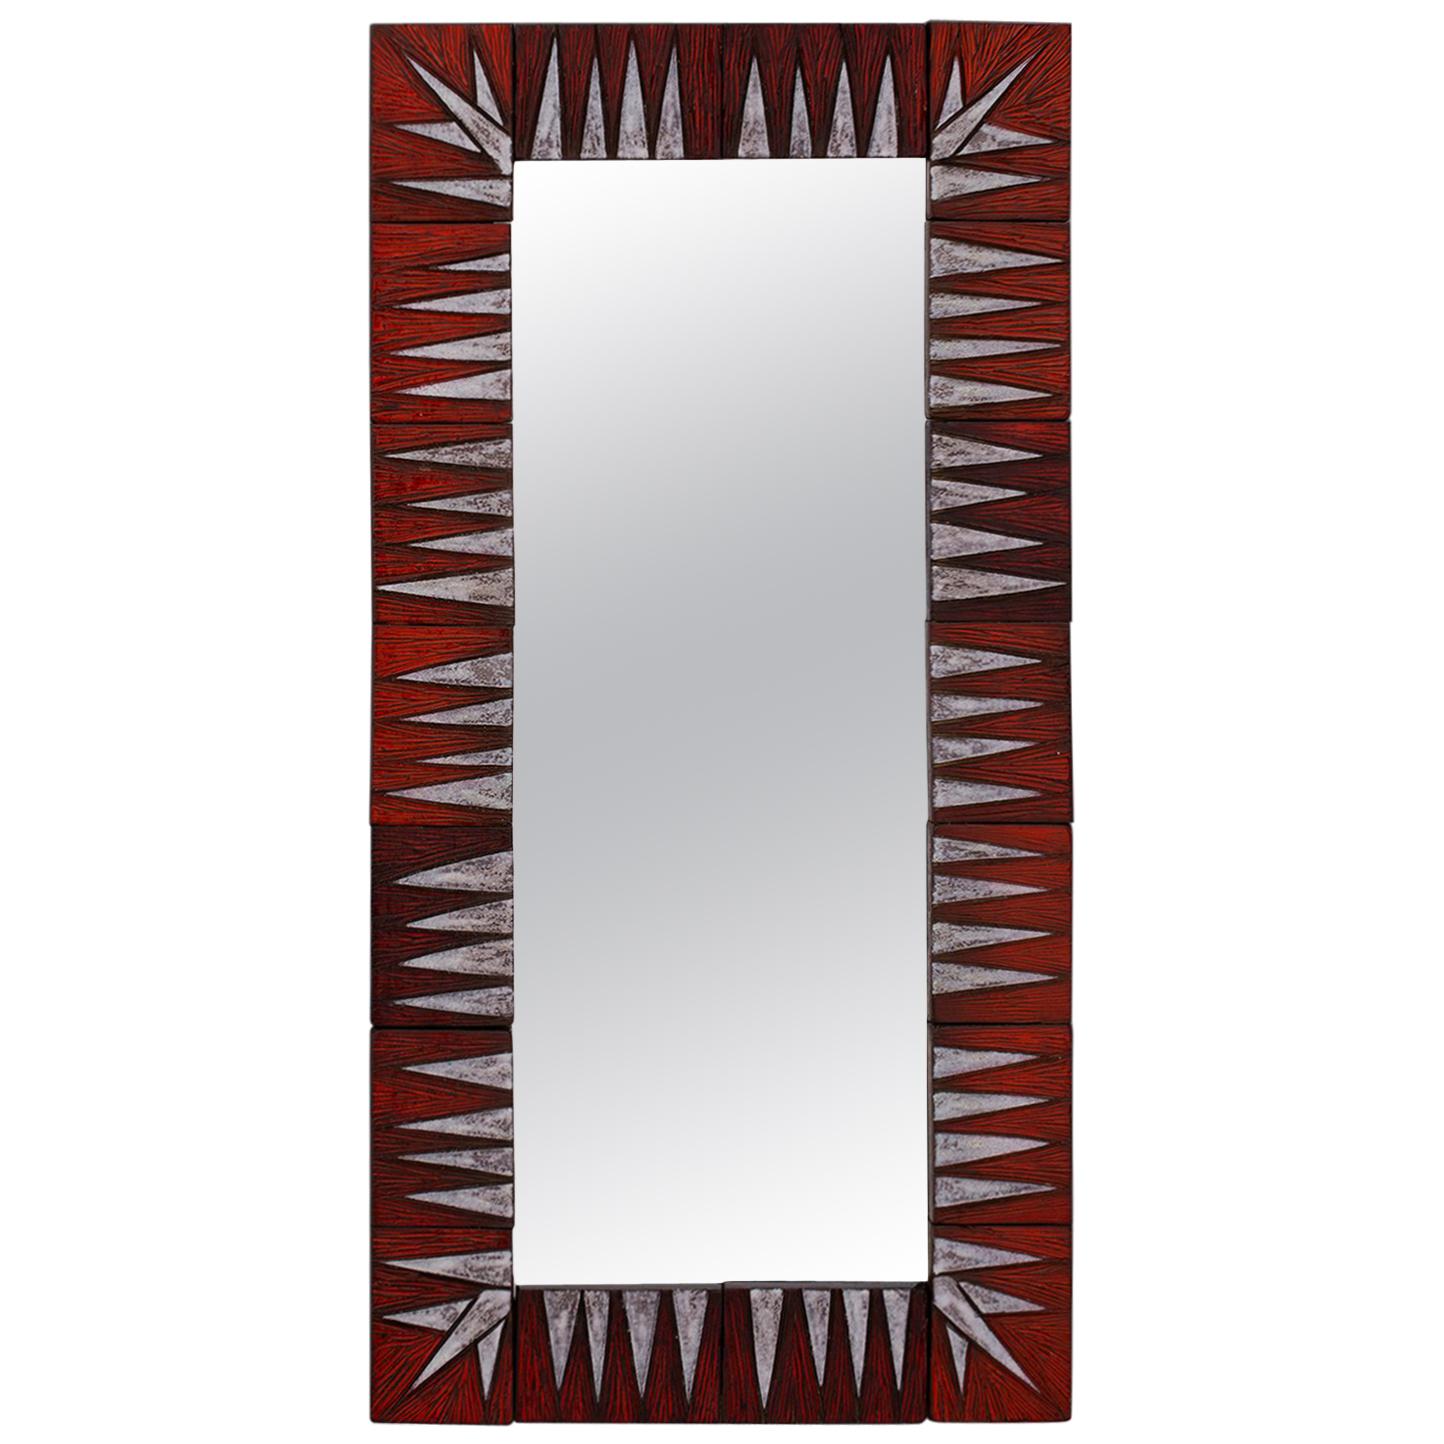 Midcentury French Ceramic Red and White Tile Framed Mirror